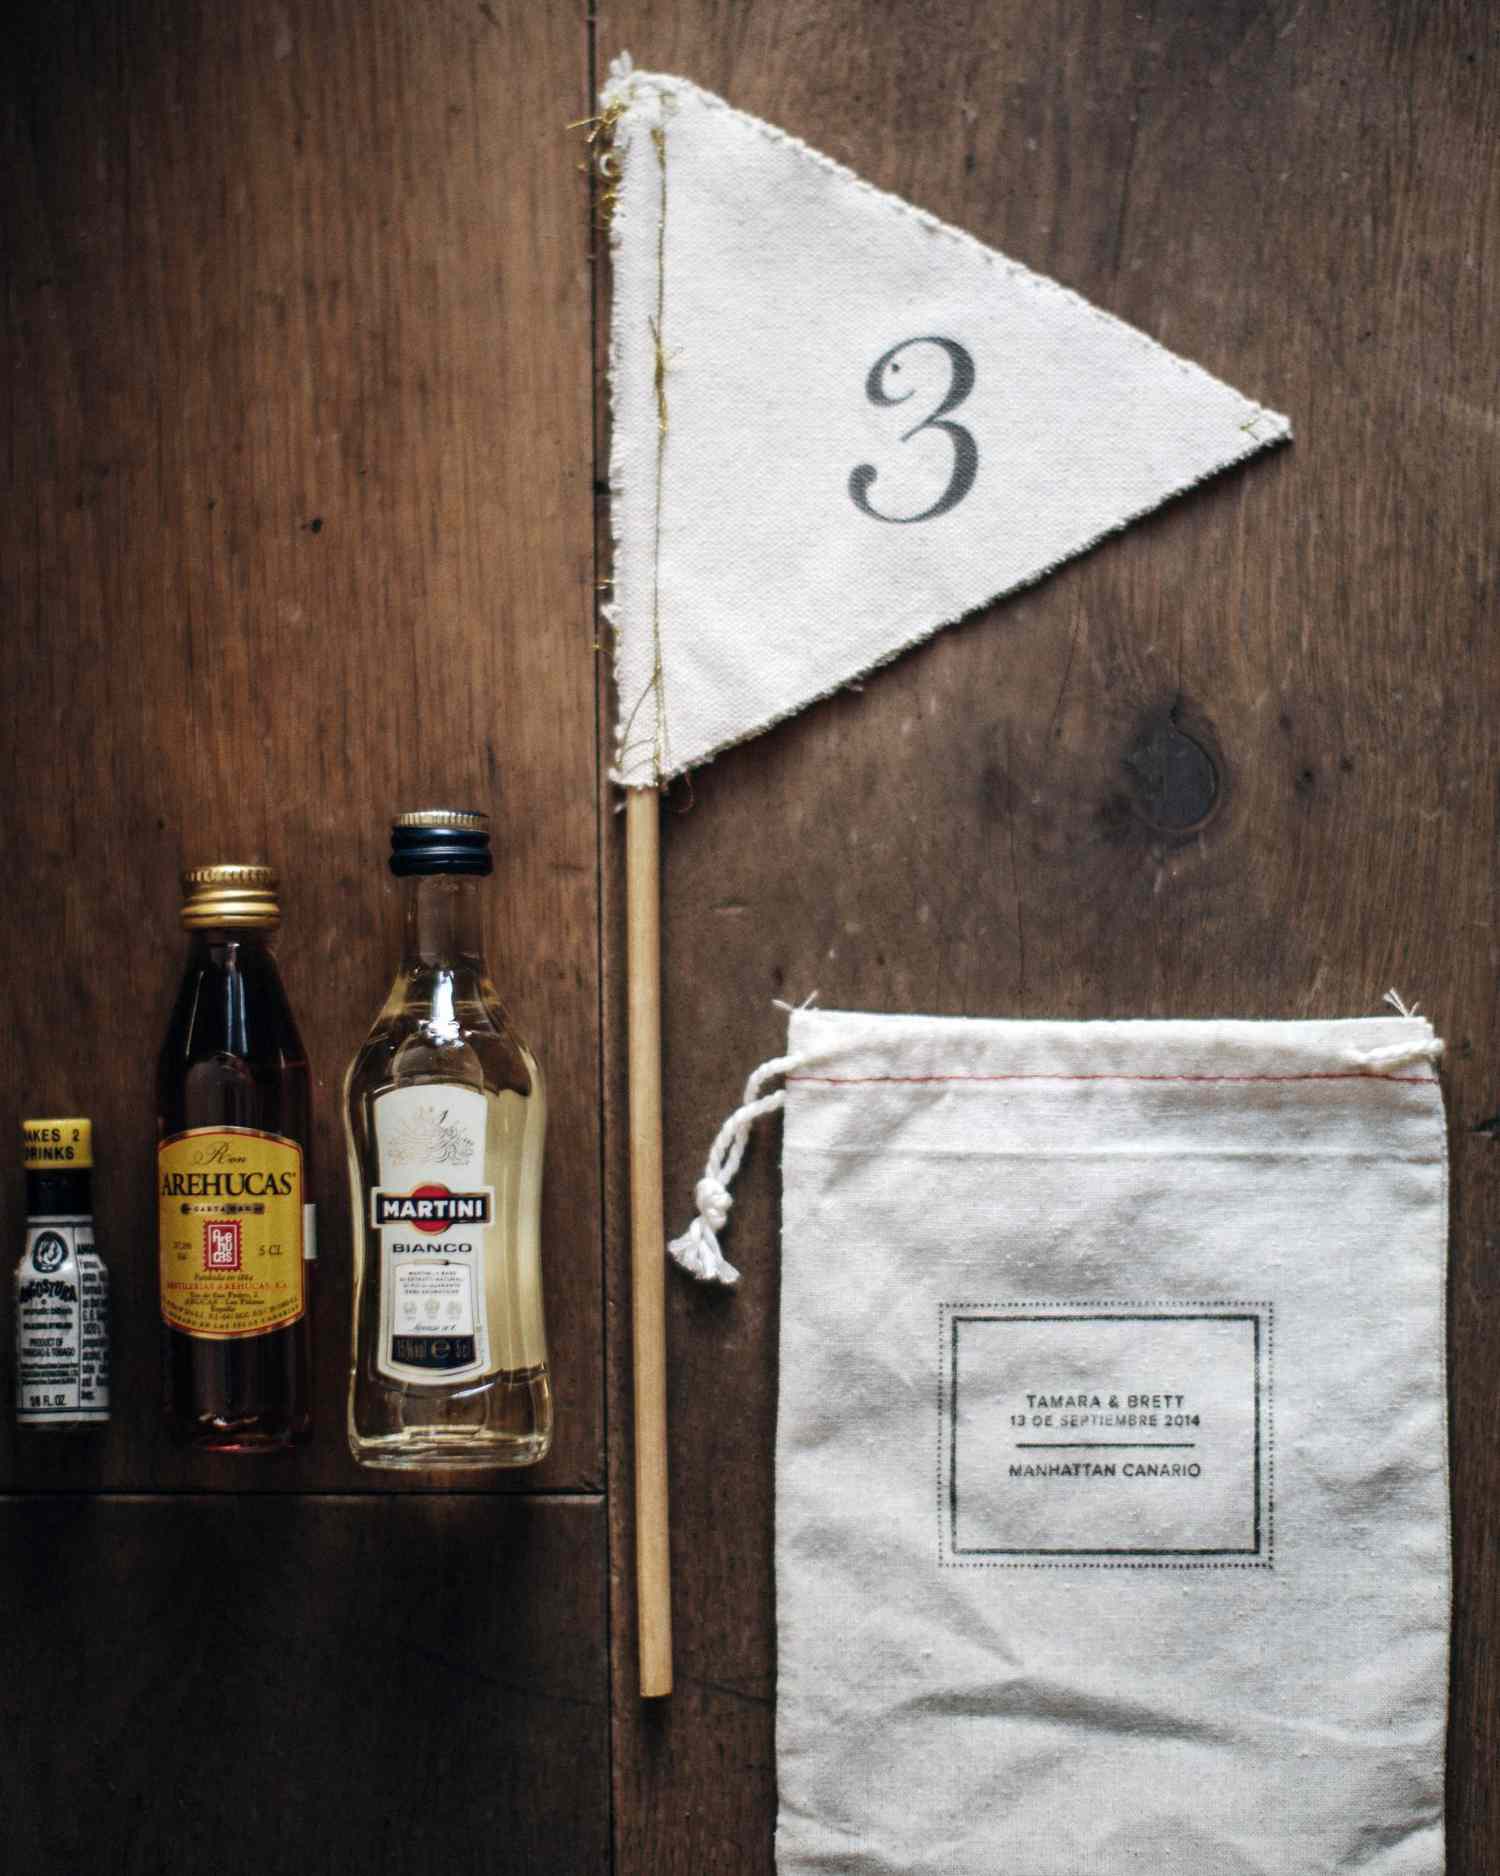 <p>Muslin pouches containing ingredients for a "Canarian" Manhattan went home with guests at this Canary Islands destination wedding. Instead of bourbon, the kit contained local Arehucas rum.</p>
                            